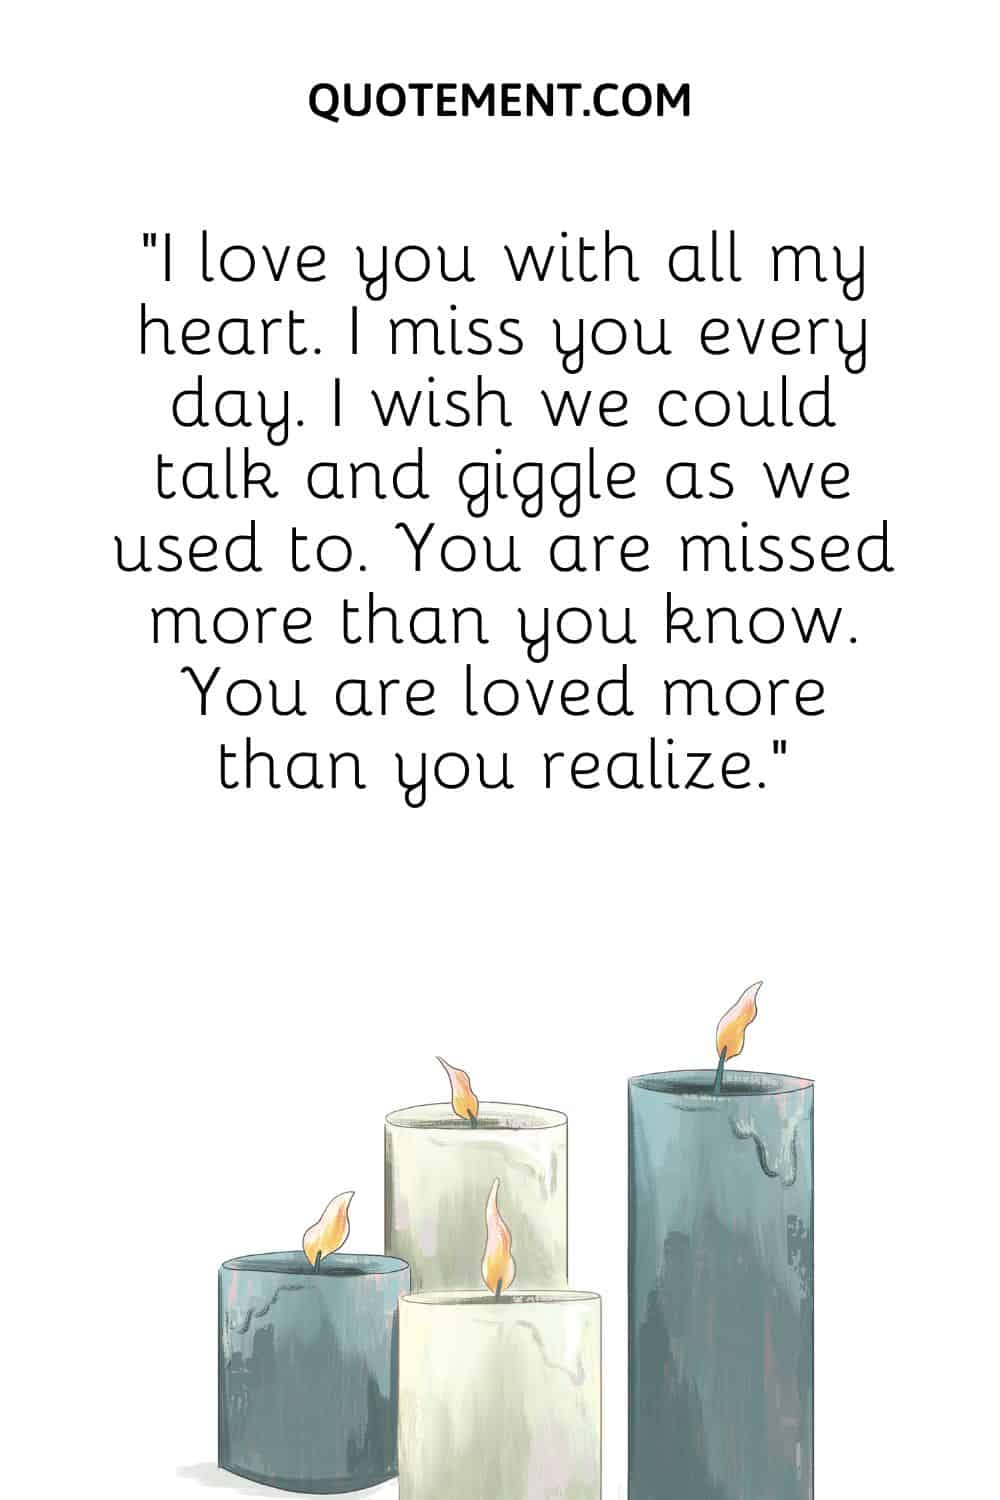 “I love you with all my heart. I miss you every day. I wish we could talk and giggle as we used to.